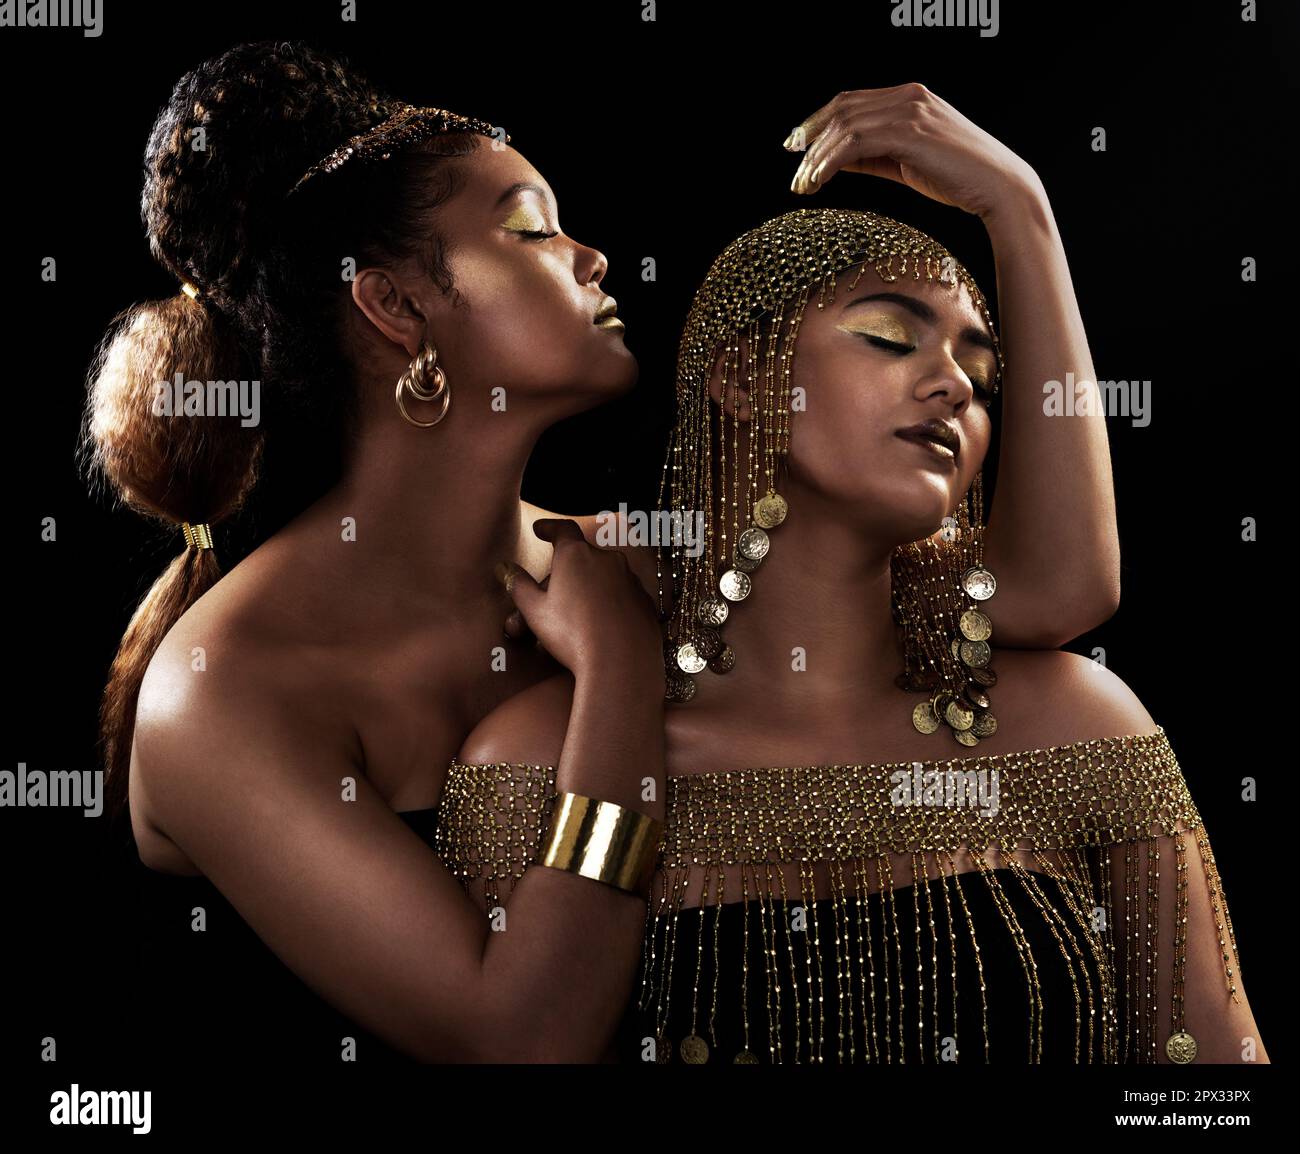 Real queens fix each others crowns. two attractive and elegantly dressed  young women posing together against a dark background Stock Photo - Alamy